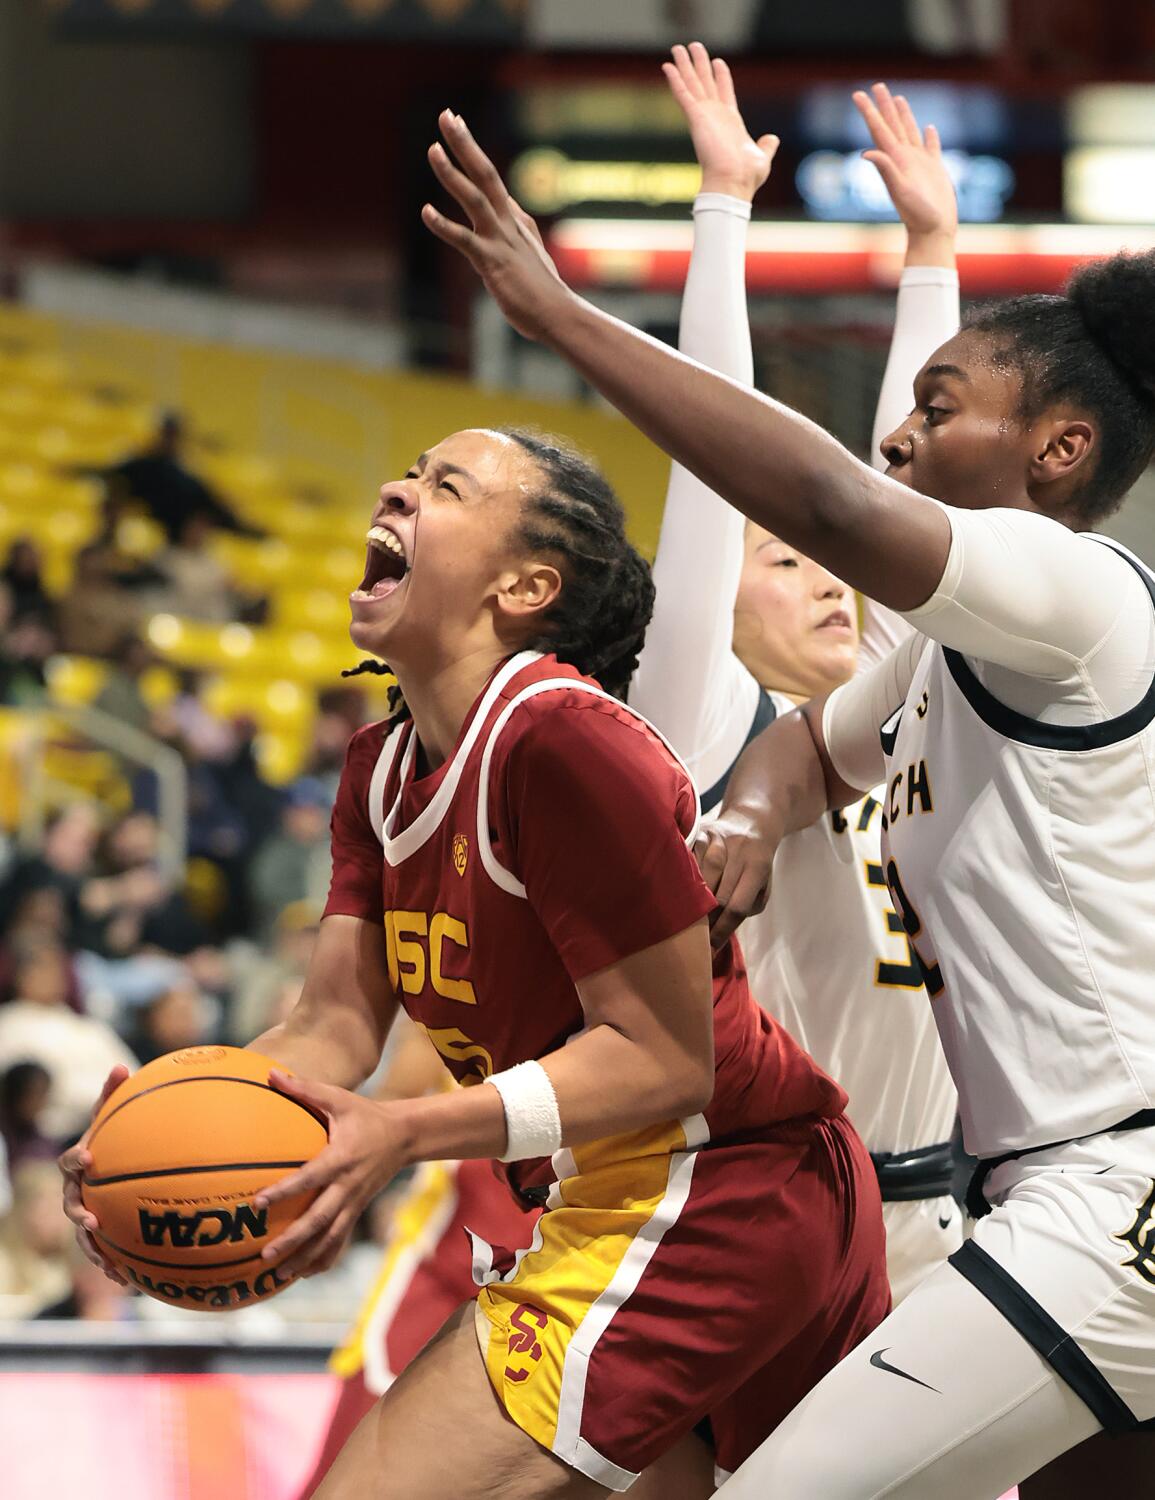 McKenzie Forbes scores 36 as No. 6 USC holds on to defeat Long Beach State